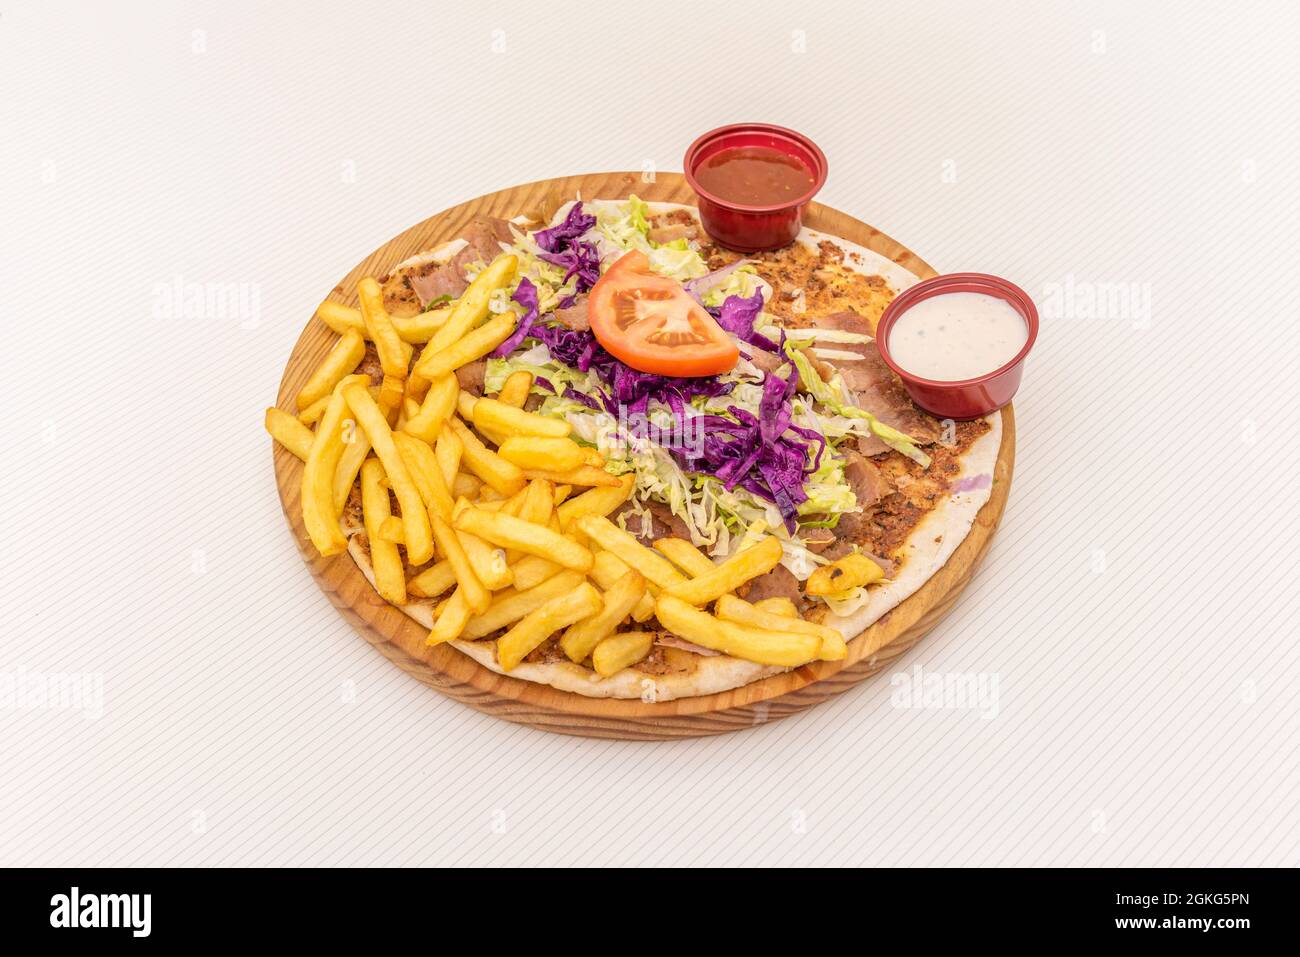 Turkish lahmacun pizza with purple cabbage, iceberg lettuce, tomato and lamb fries. Stock Photo